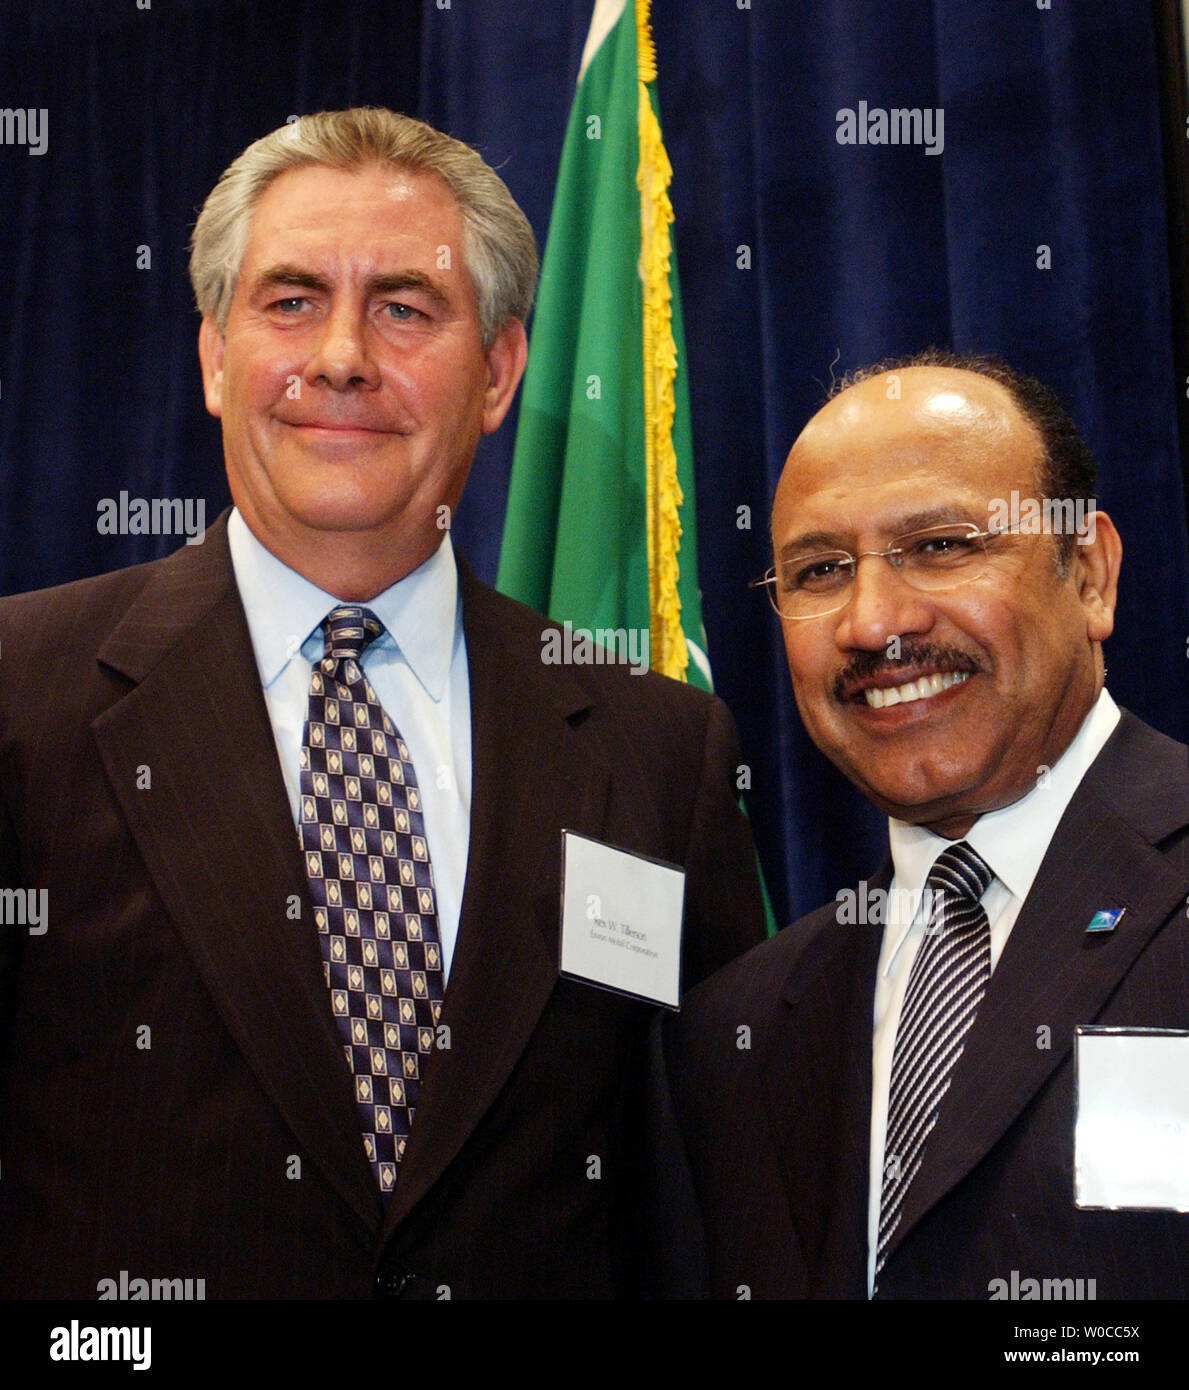 Abdallah Jum'ah, CEO of Saudi Aramco has a laugh with Rex Tillerson, President of Exxon Mobil, left, during a conference on the United States and Saudi Arabia relationship and their interests in energy security, on April 27, 2004 in Washington.  The conference was sponsored by CSIS and dealt with oil reserves, production, prices and security. (UPI Photo/Michael Kleinfeld) Stock Photo